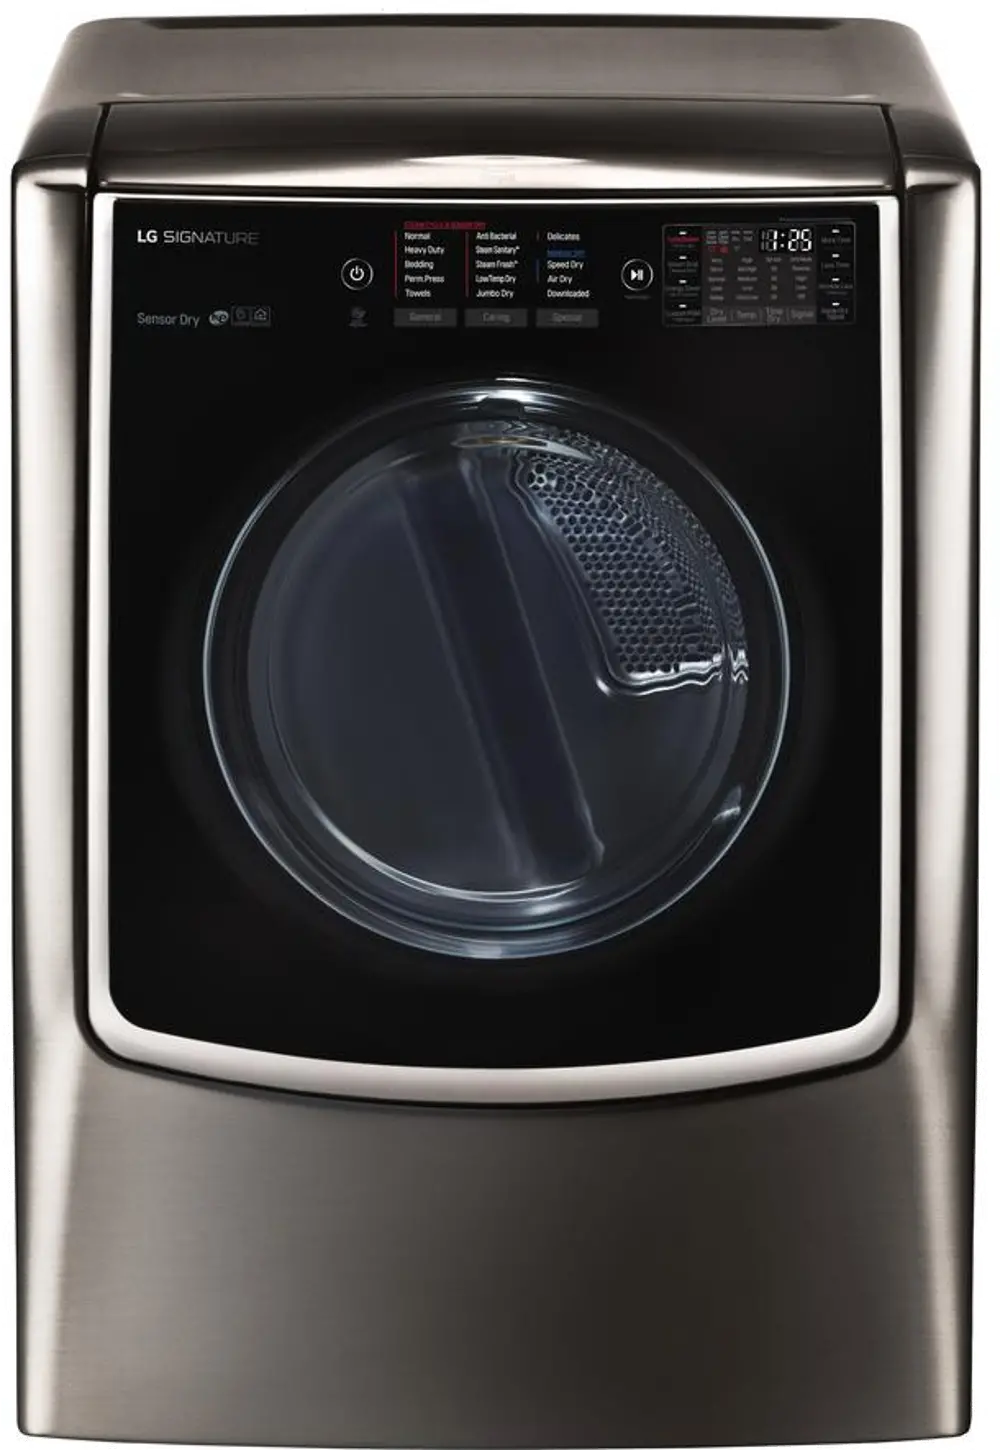 DLEX9500K LG Signature Electric Dryer - 9.0 Cu. Ft. Black Stainless Steel-1